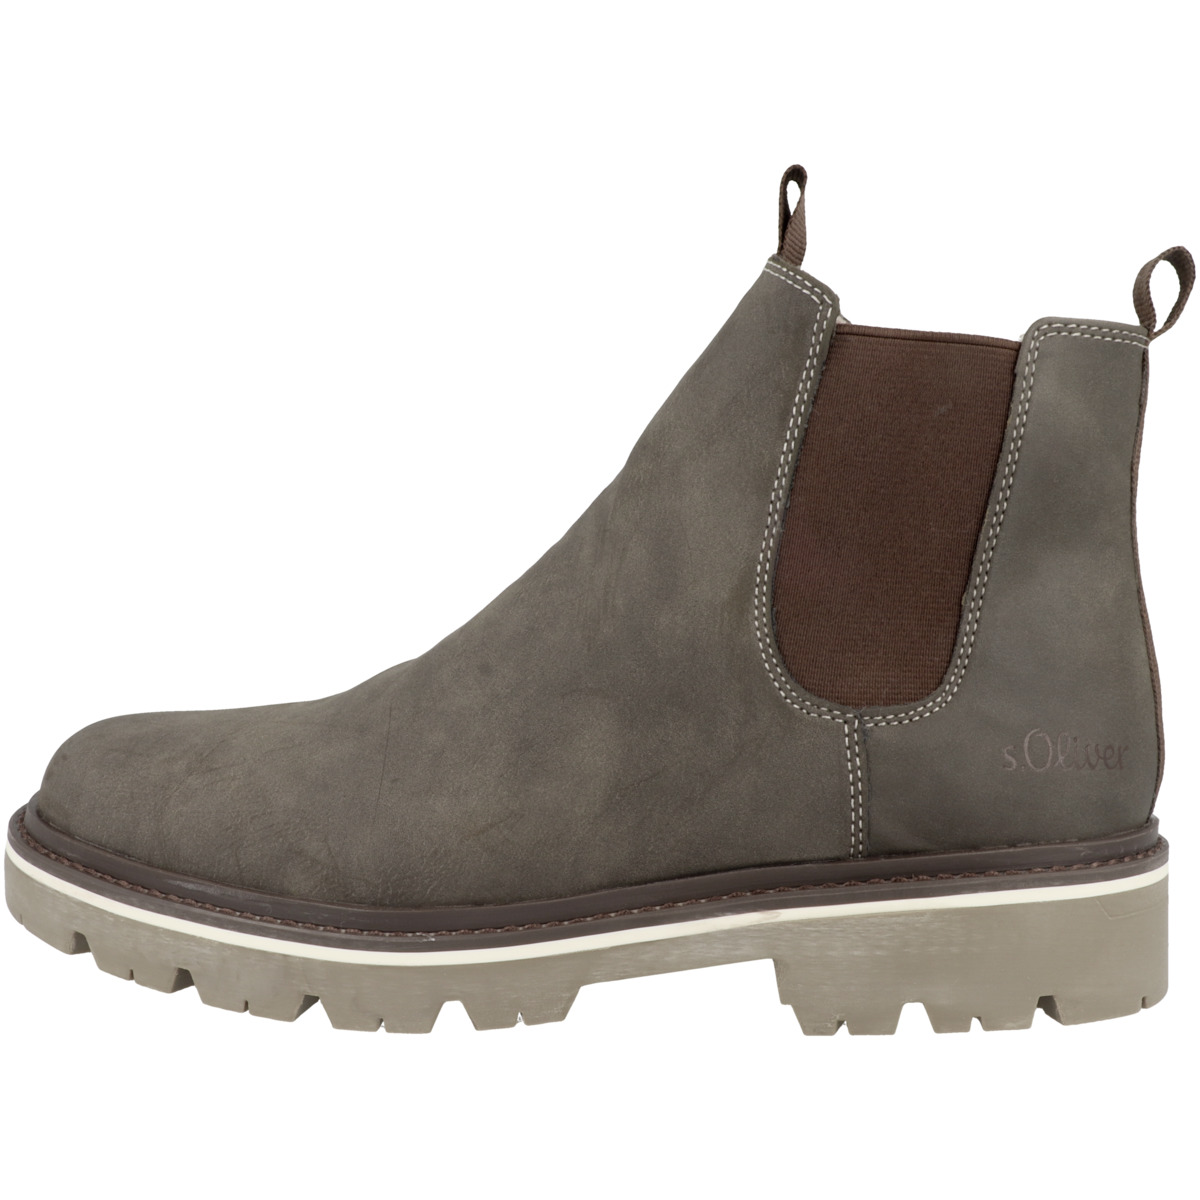 s.Oliver 5-15403-29 Chelsea Boots